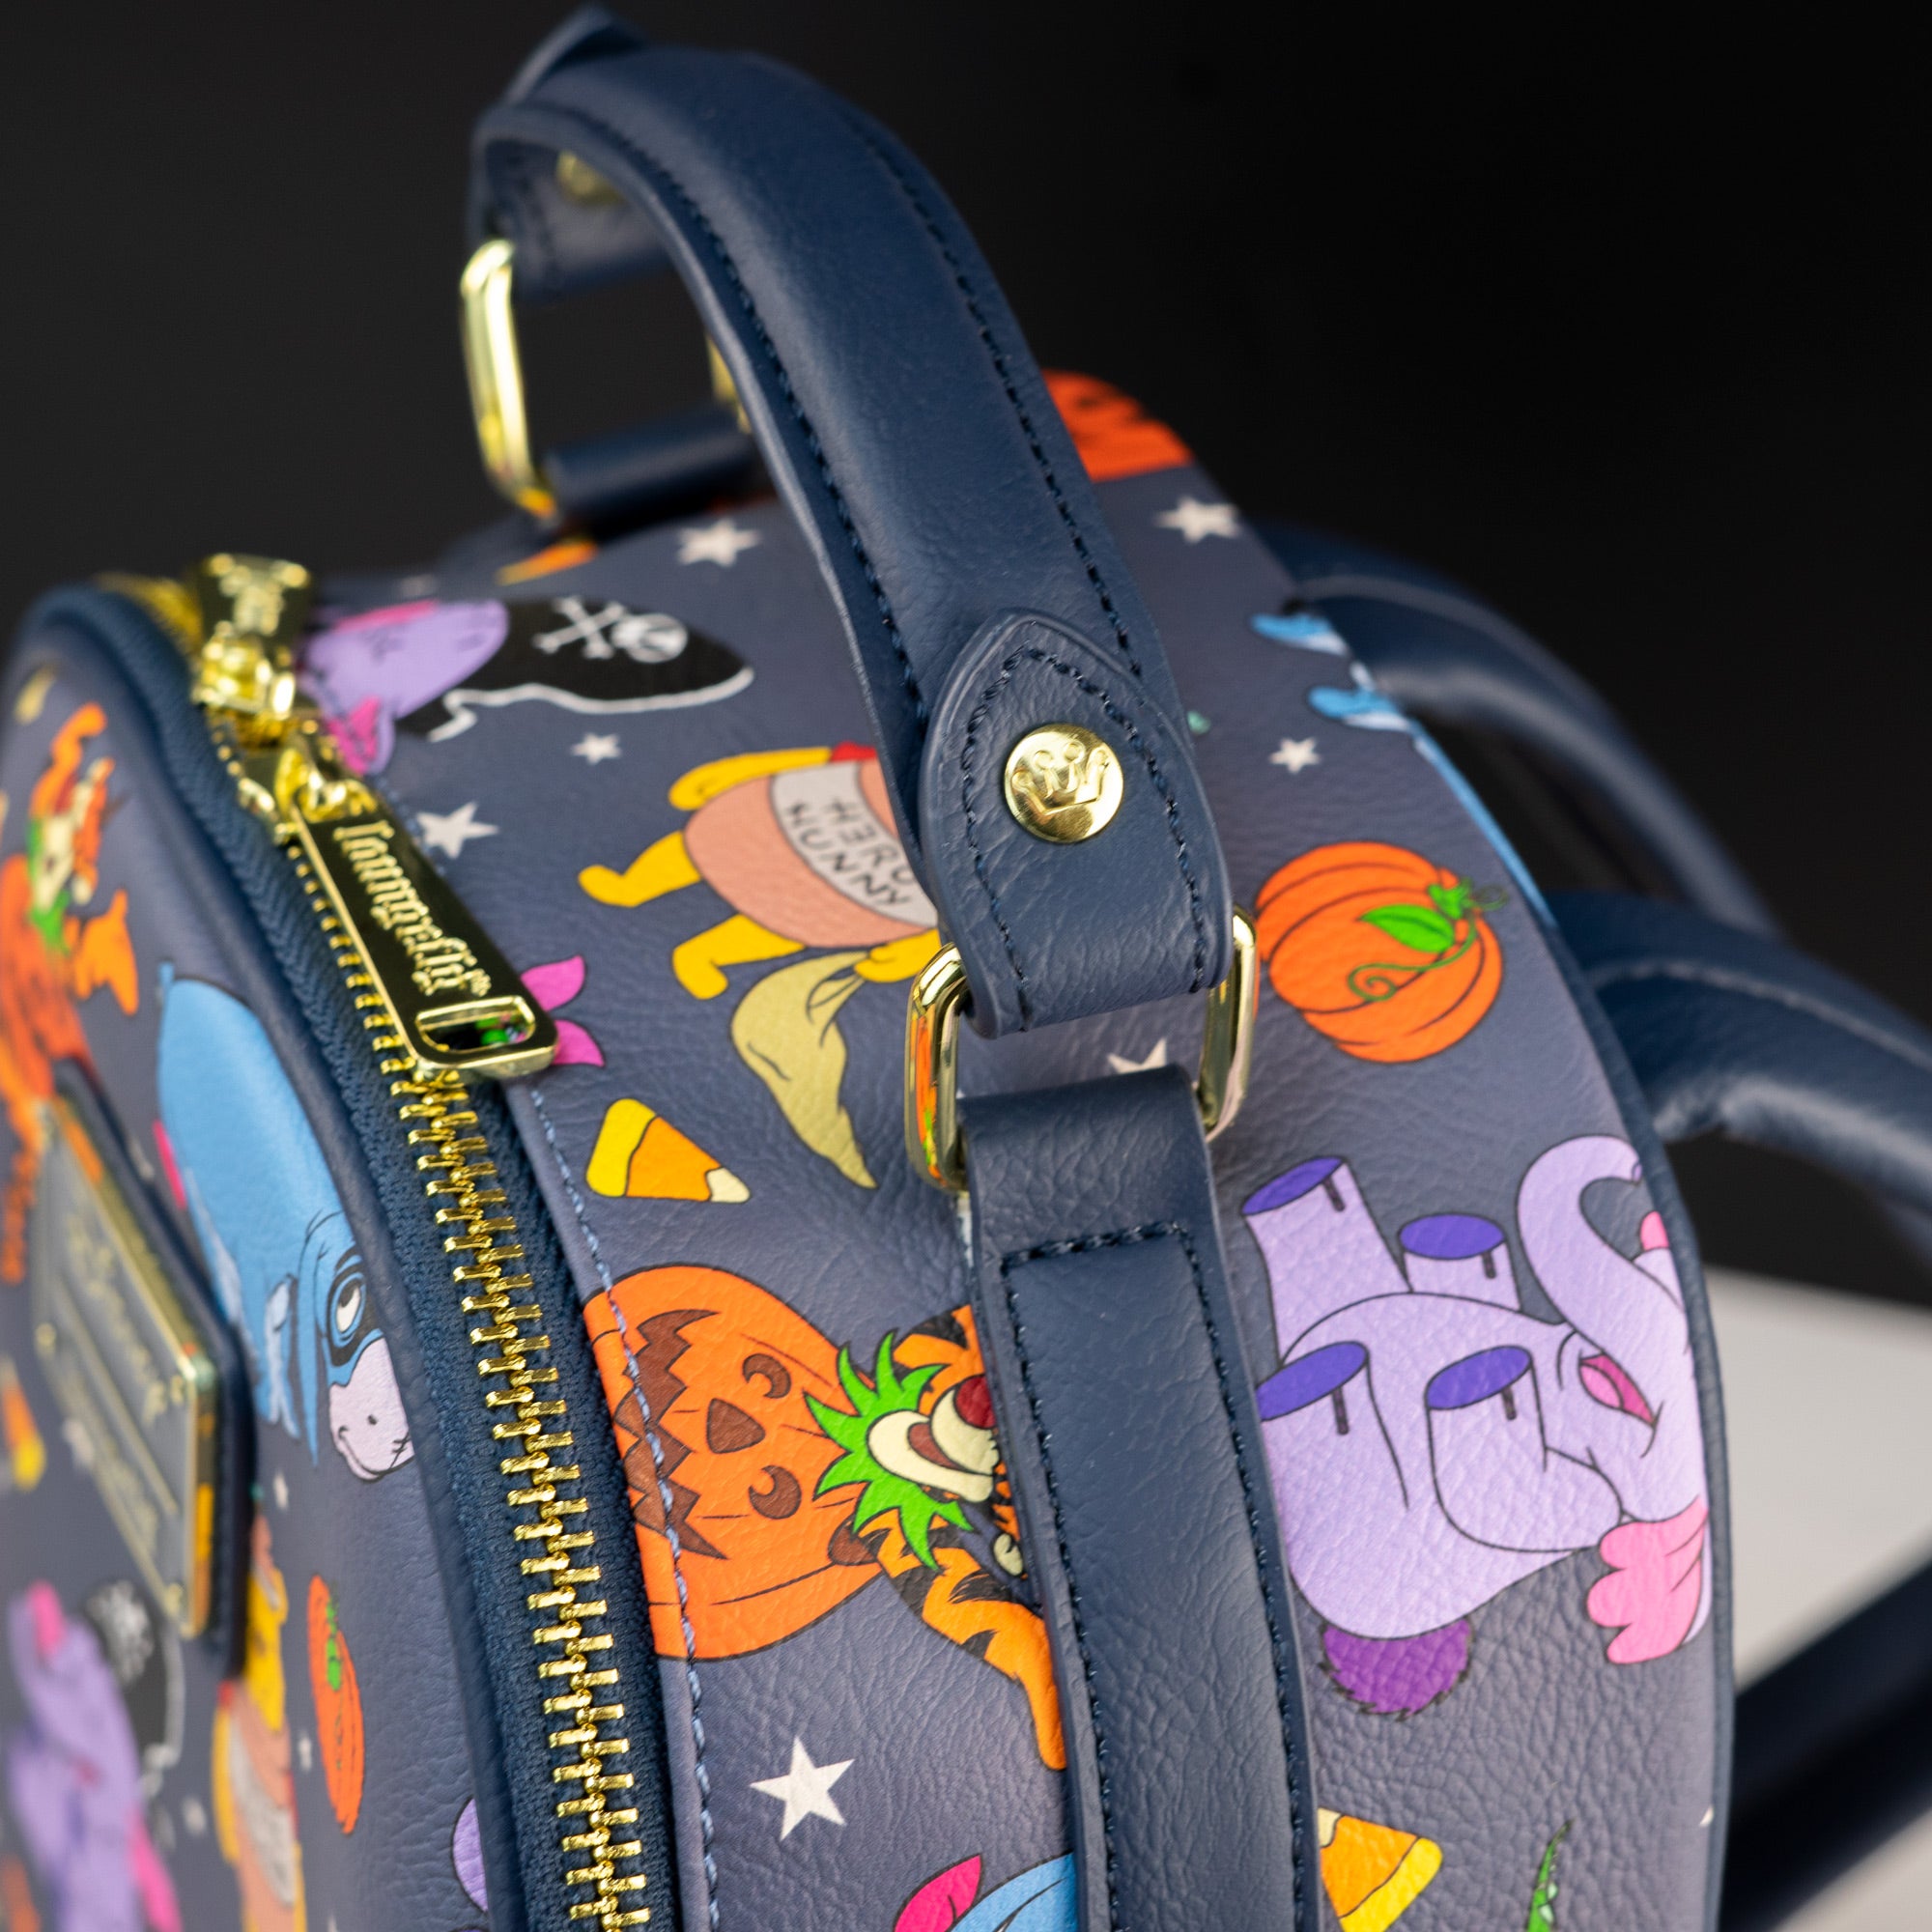 Loungefly x Disney Winnie the Pooh Characters at Halloween AOP Mini Backpack